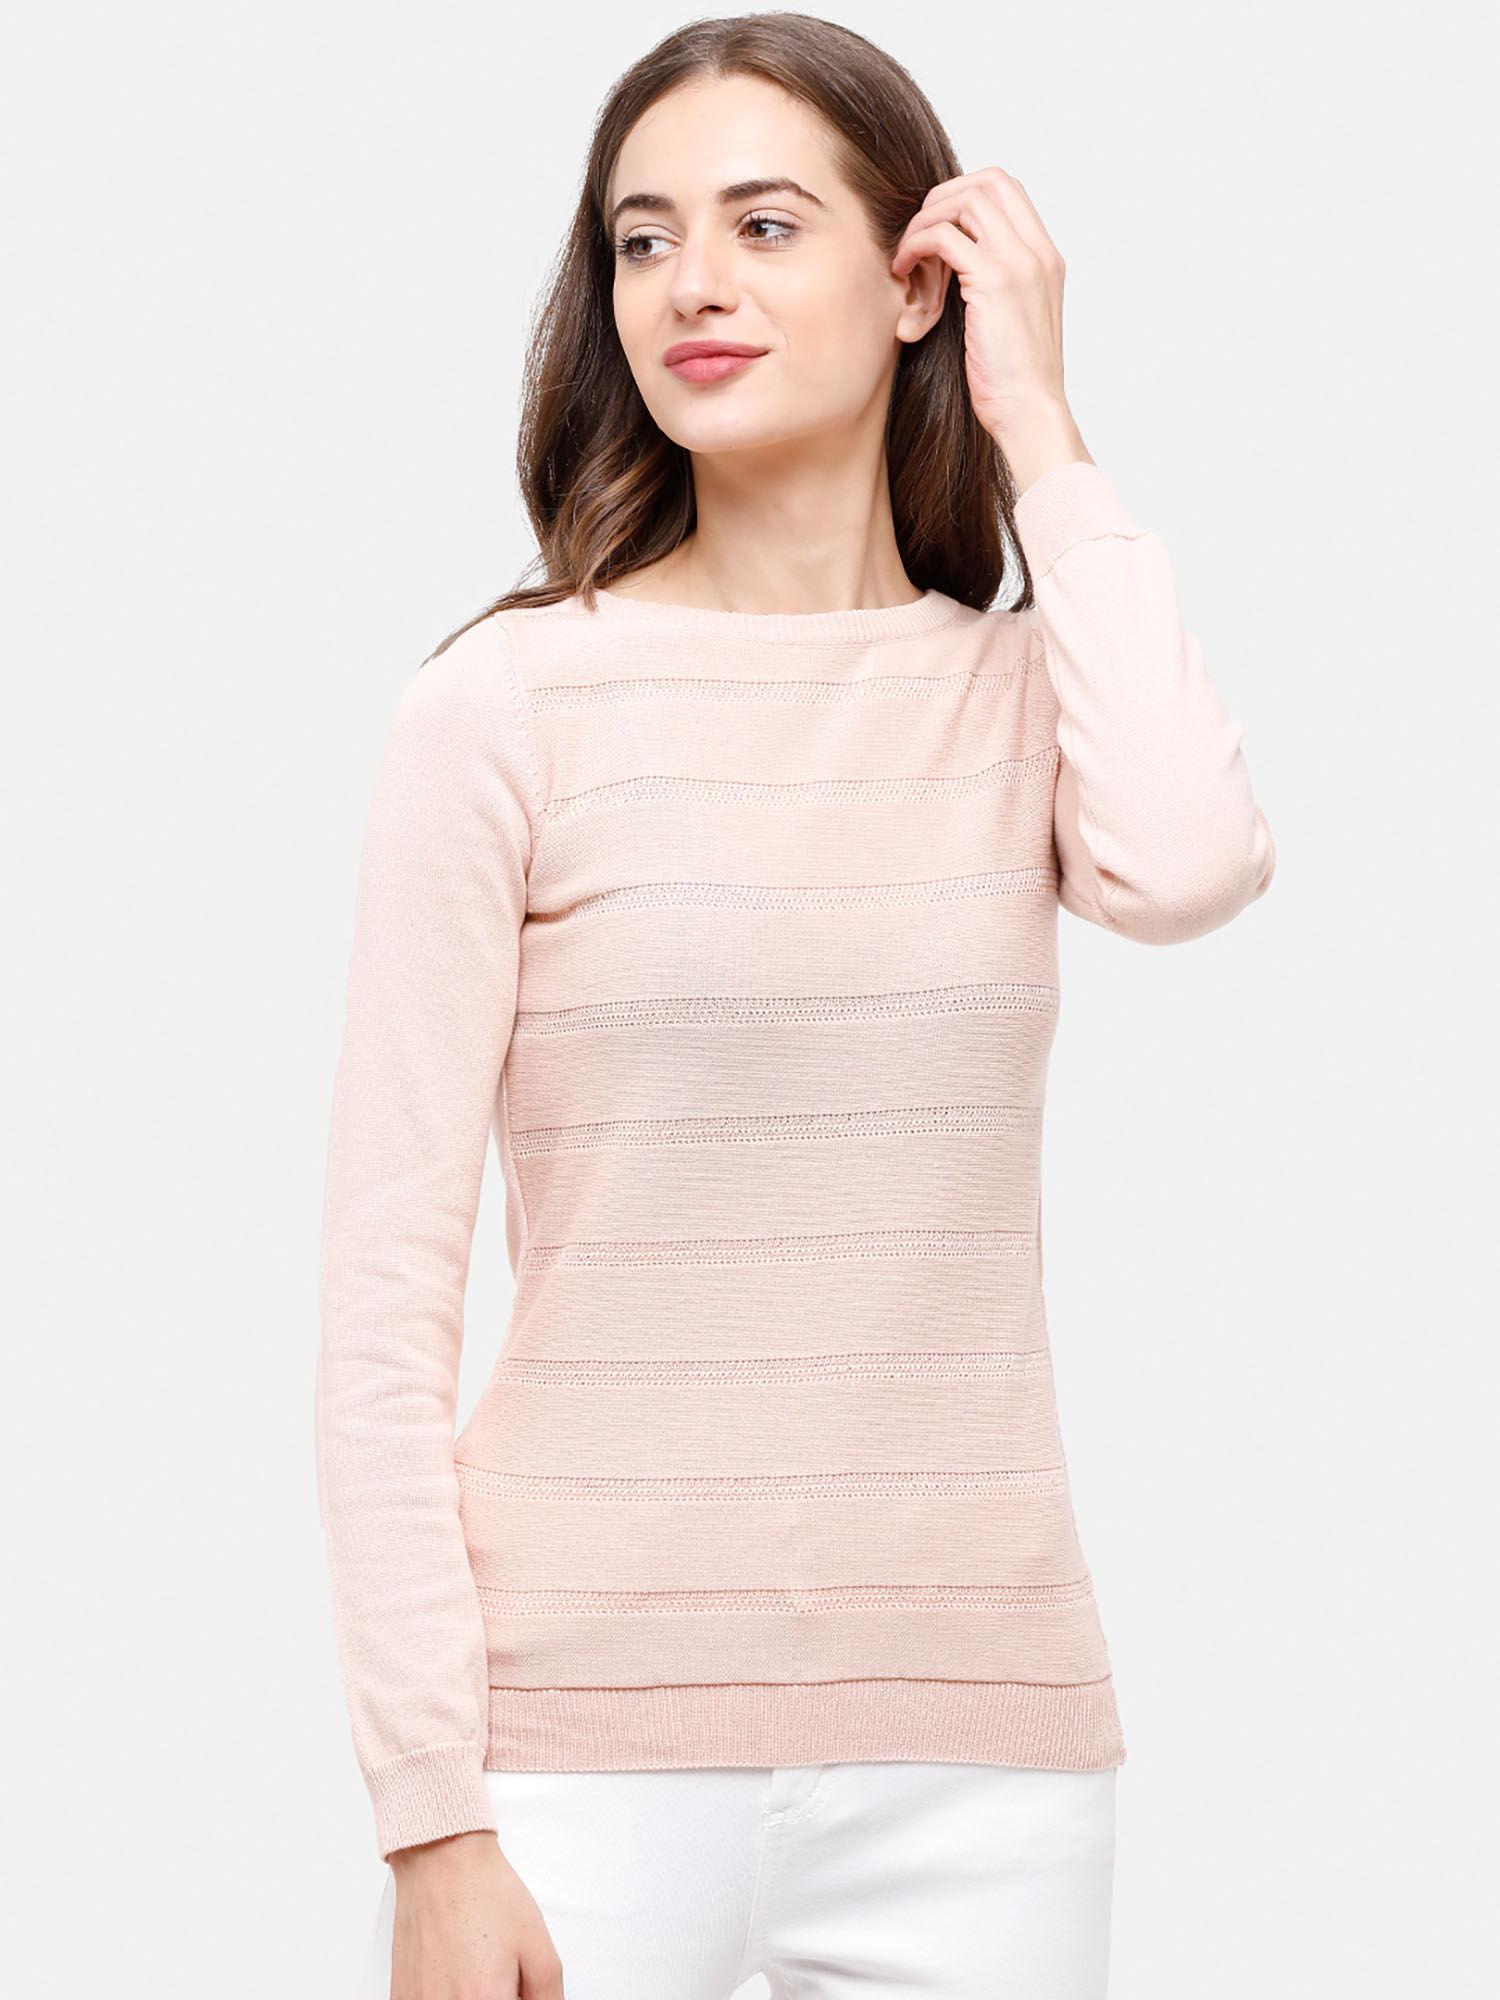 98 degree north's pink full sleeves sweater